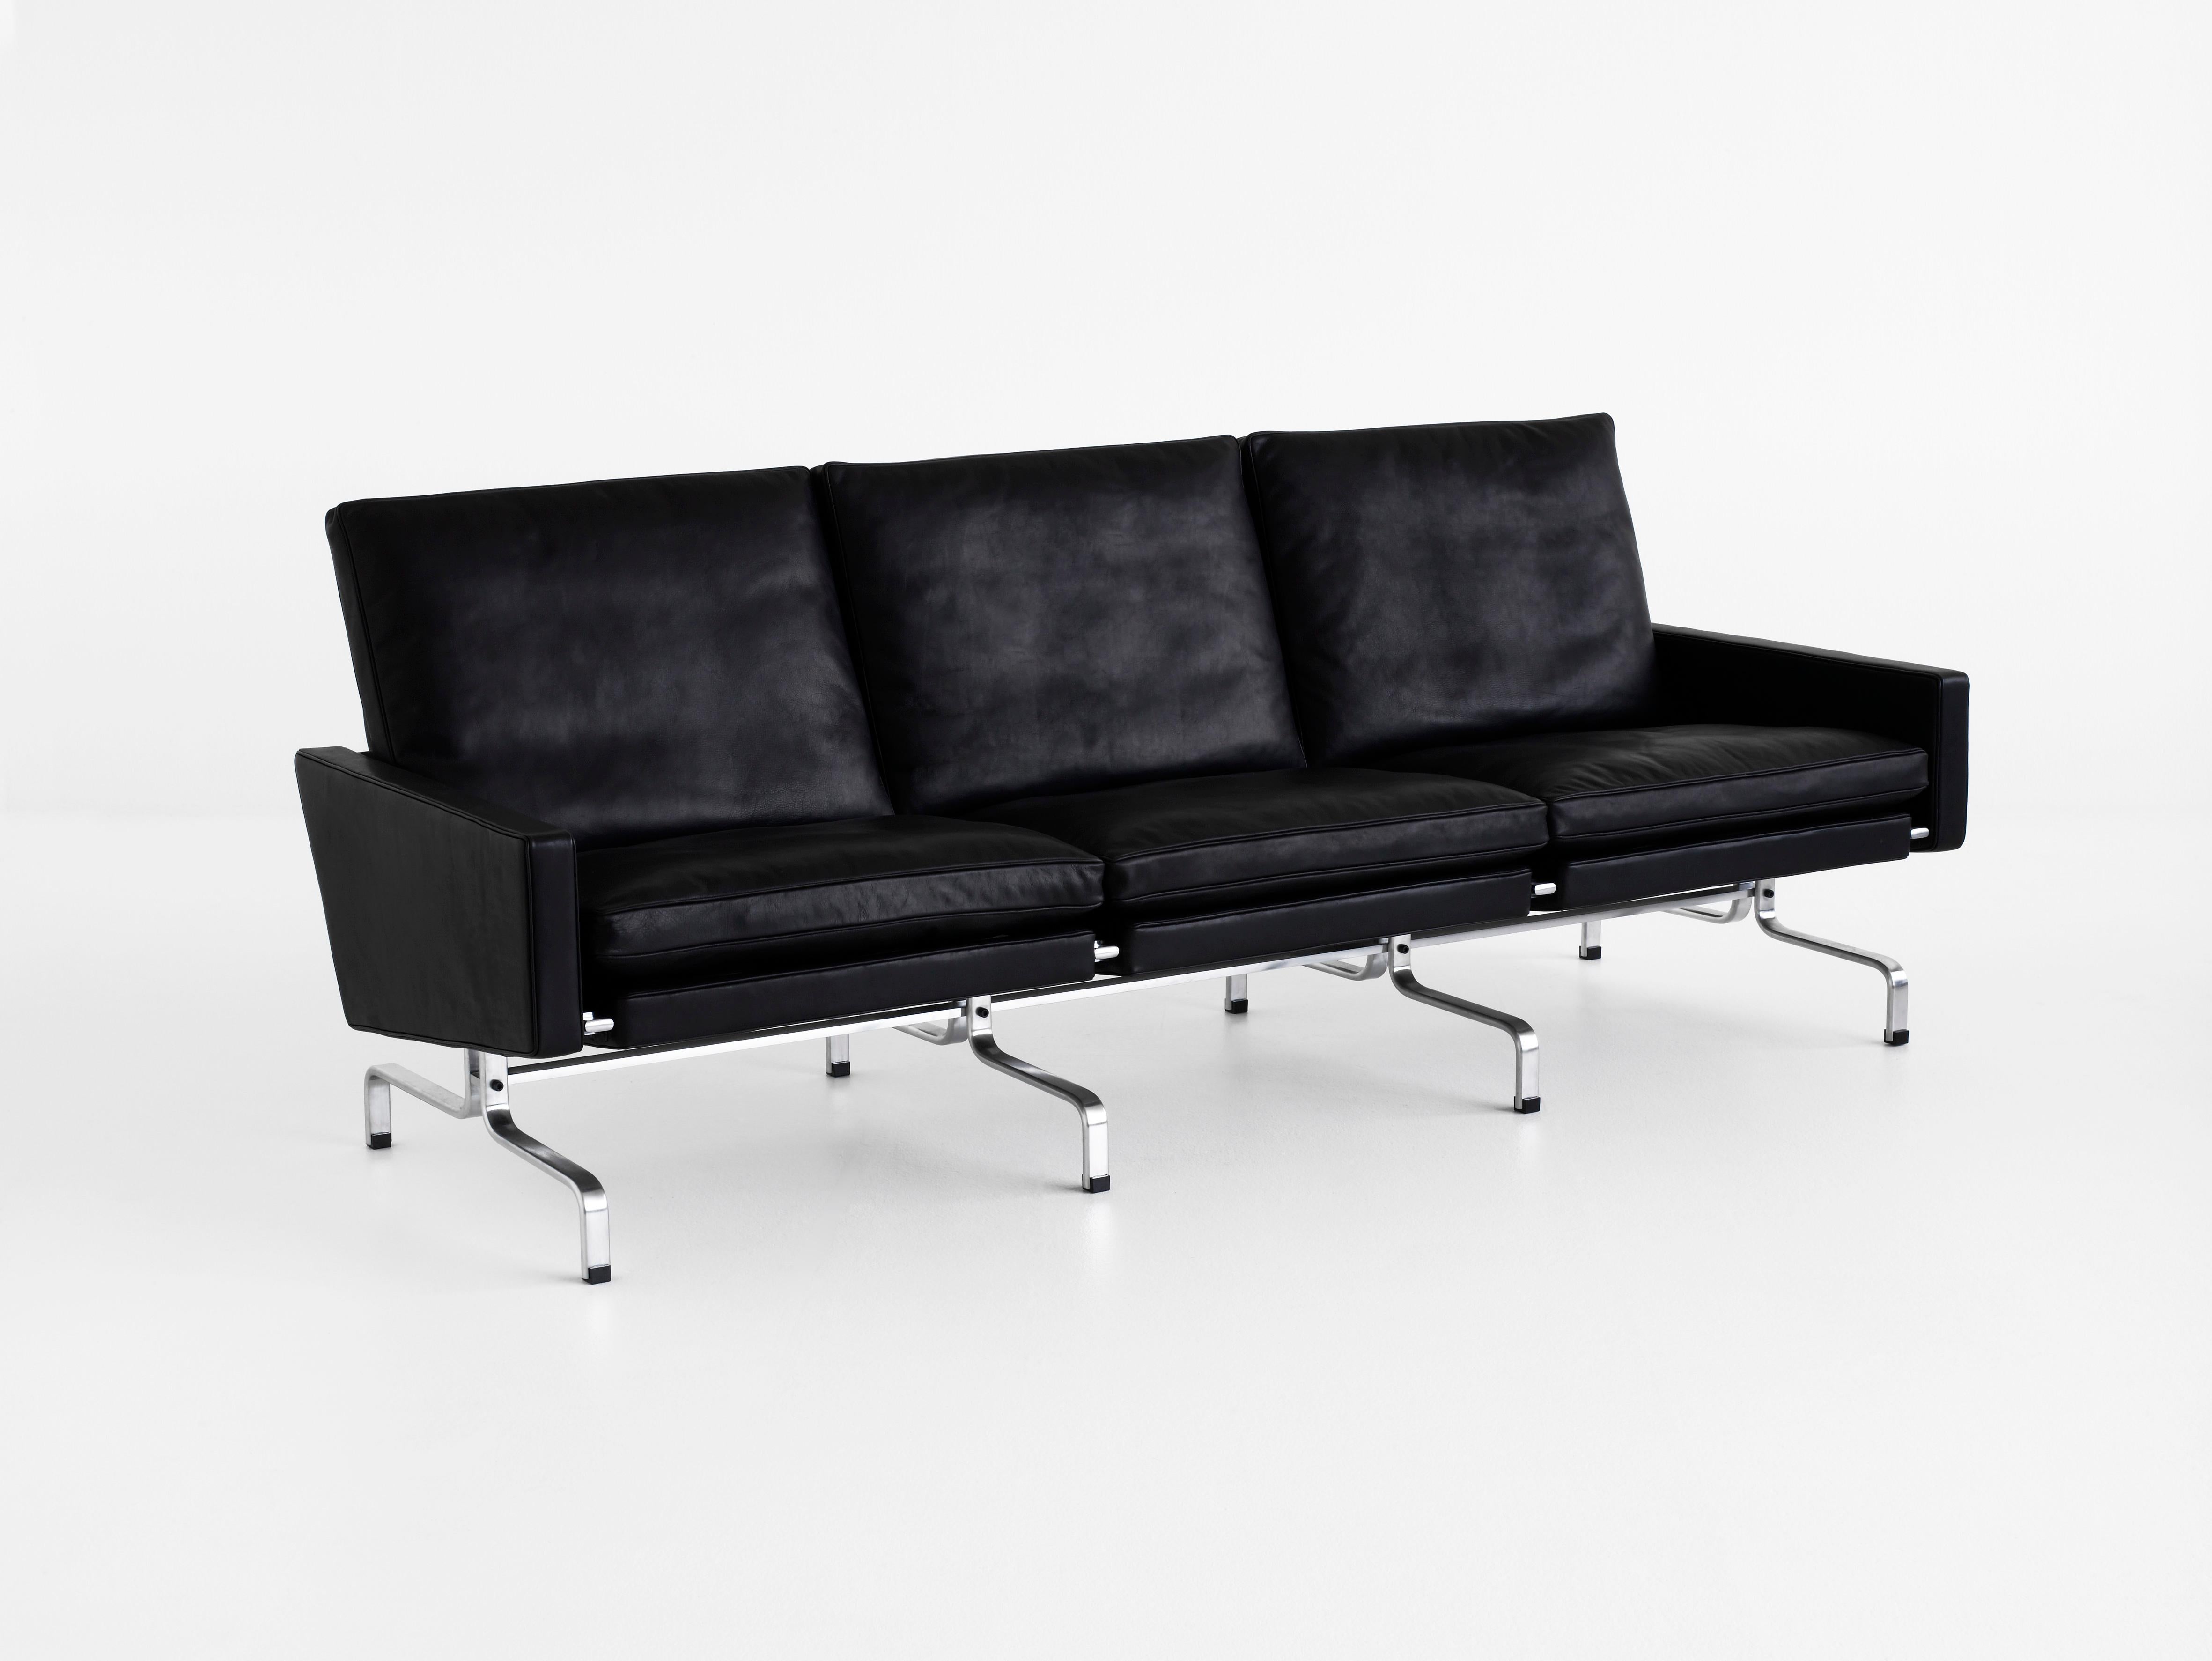 Contemporary Poul Kjærholm 'PK31' 3-Seater Sofa for Fritz Hansen in Leather (Cat. 5) For Sale